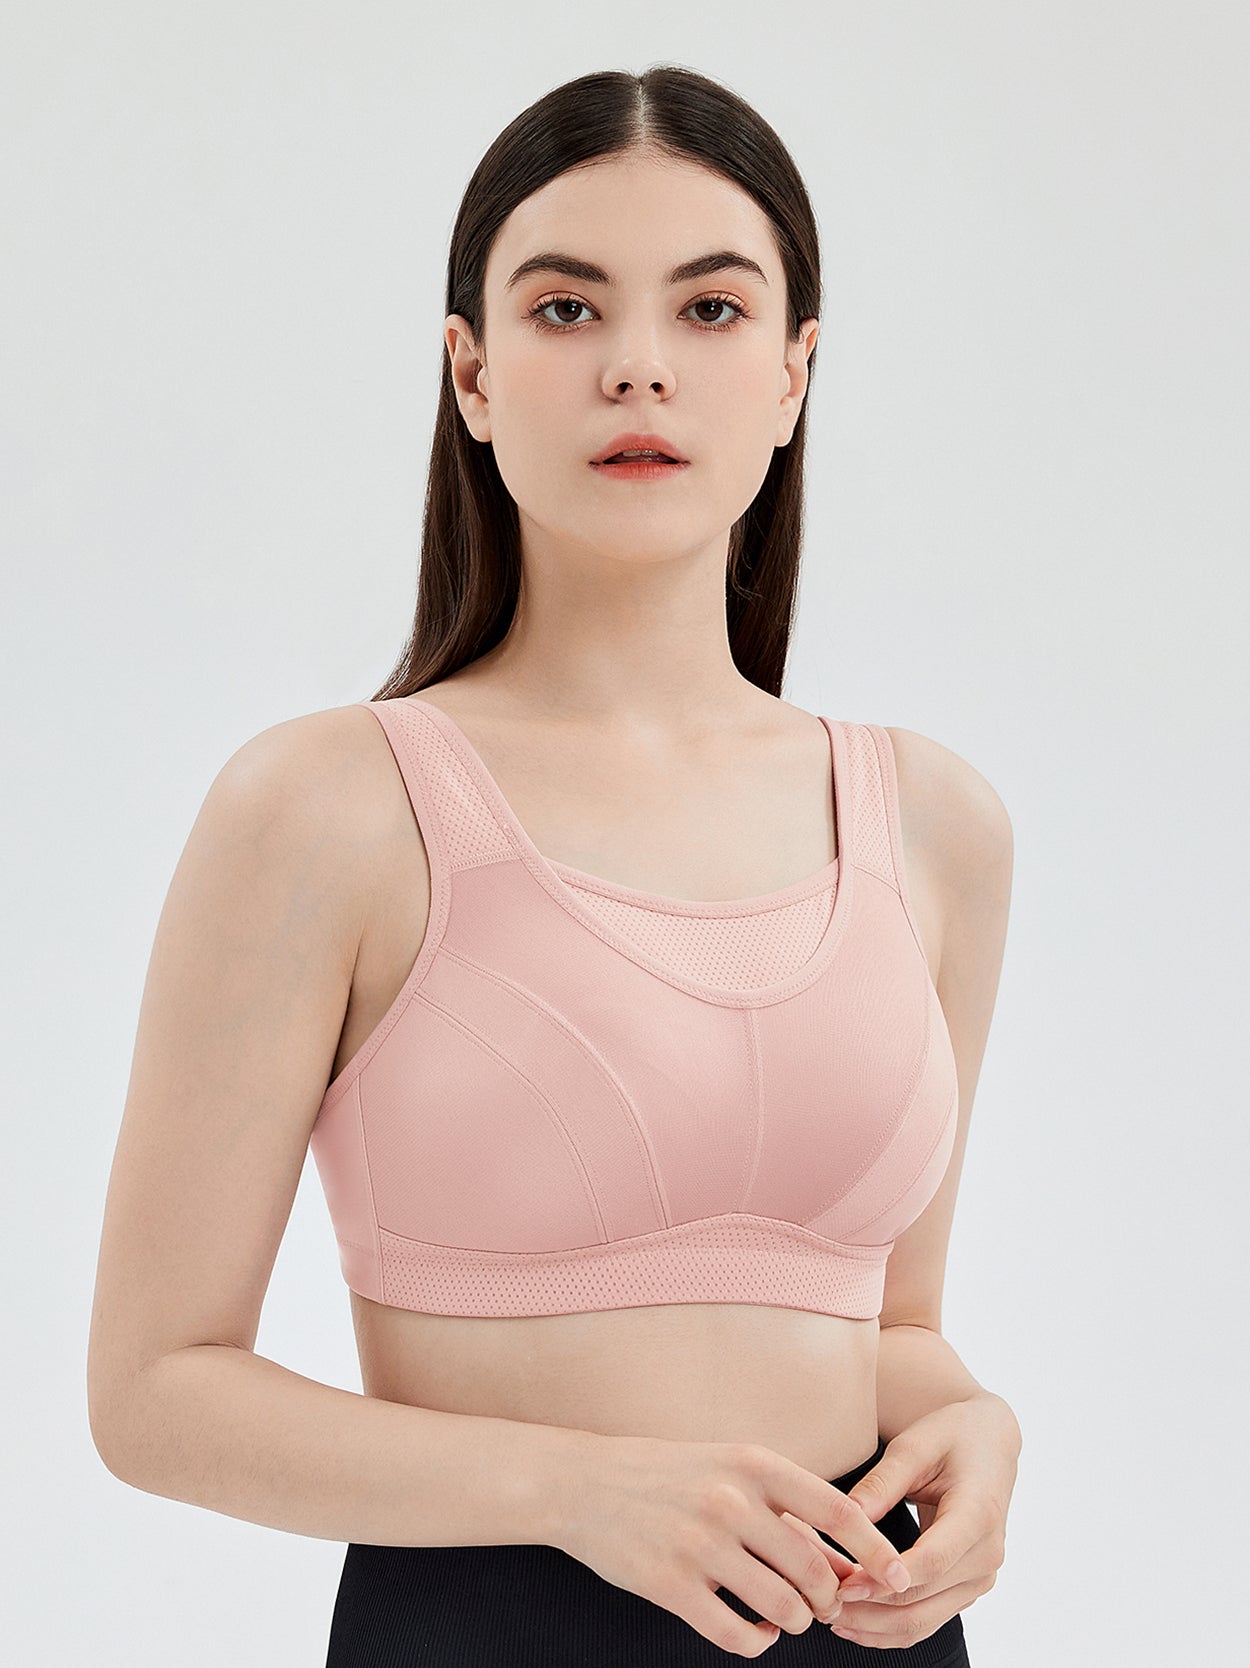 No Show High Impact Sports Bras for Women for Large Bust